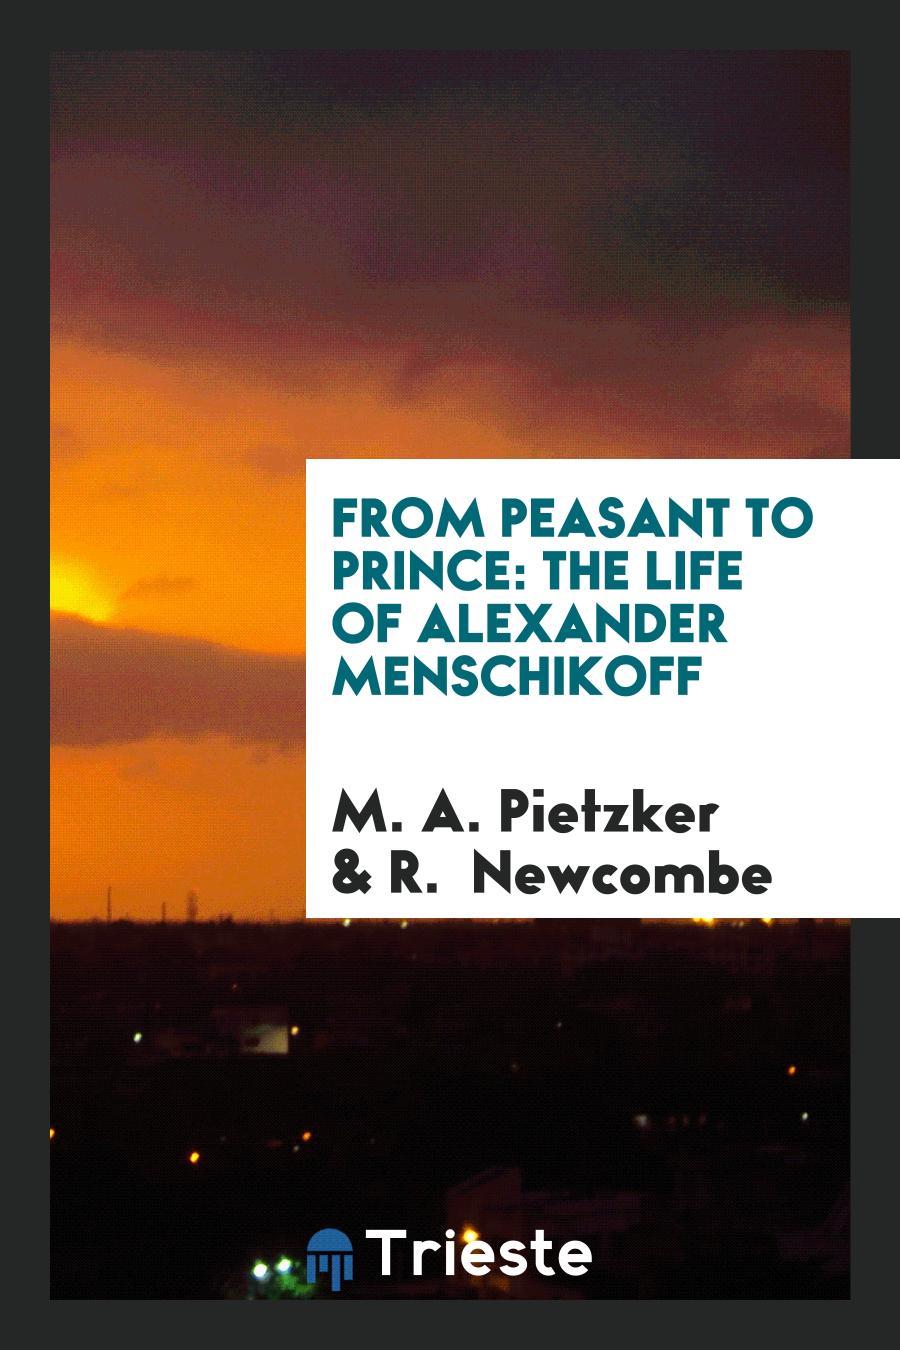 From Peasant to Prince: the Life of Alexander Menschikoff